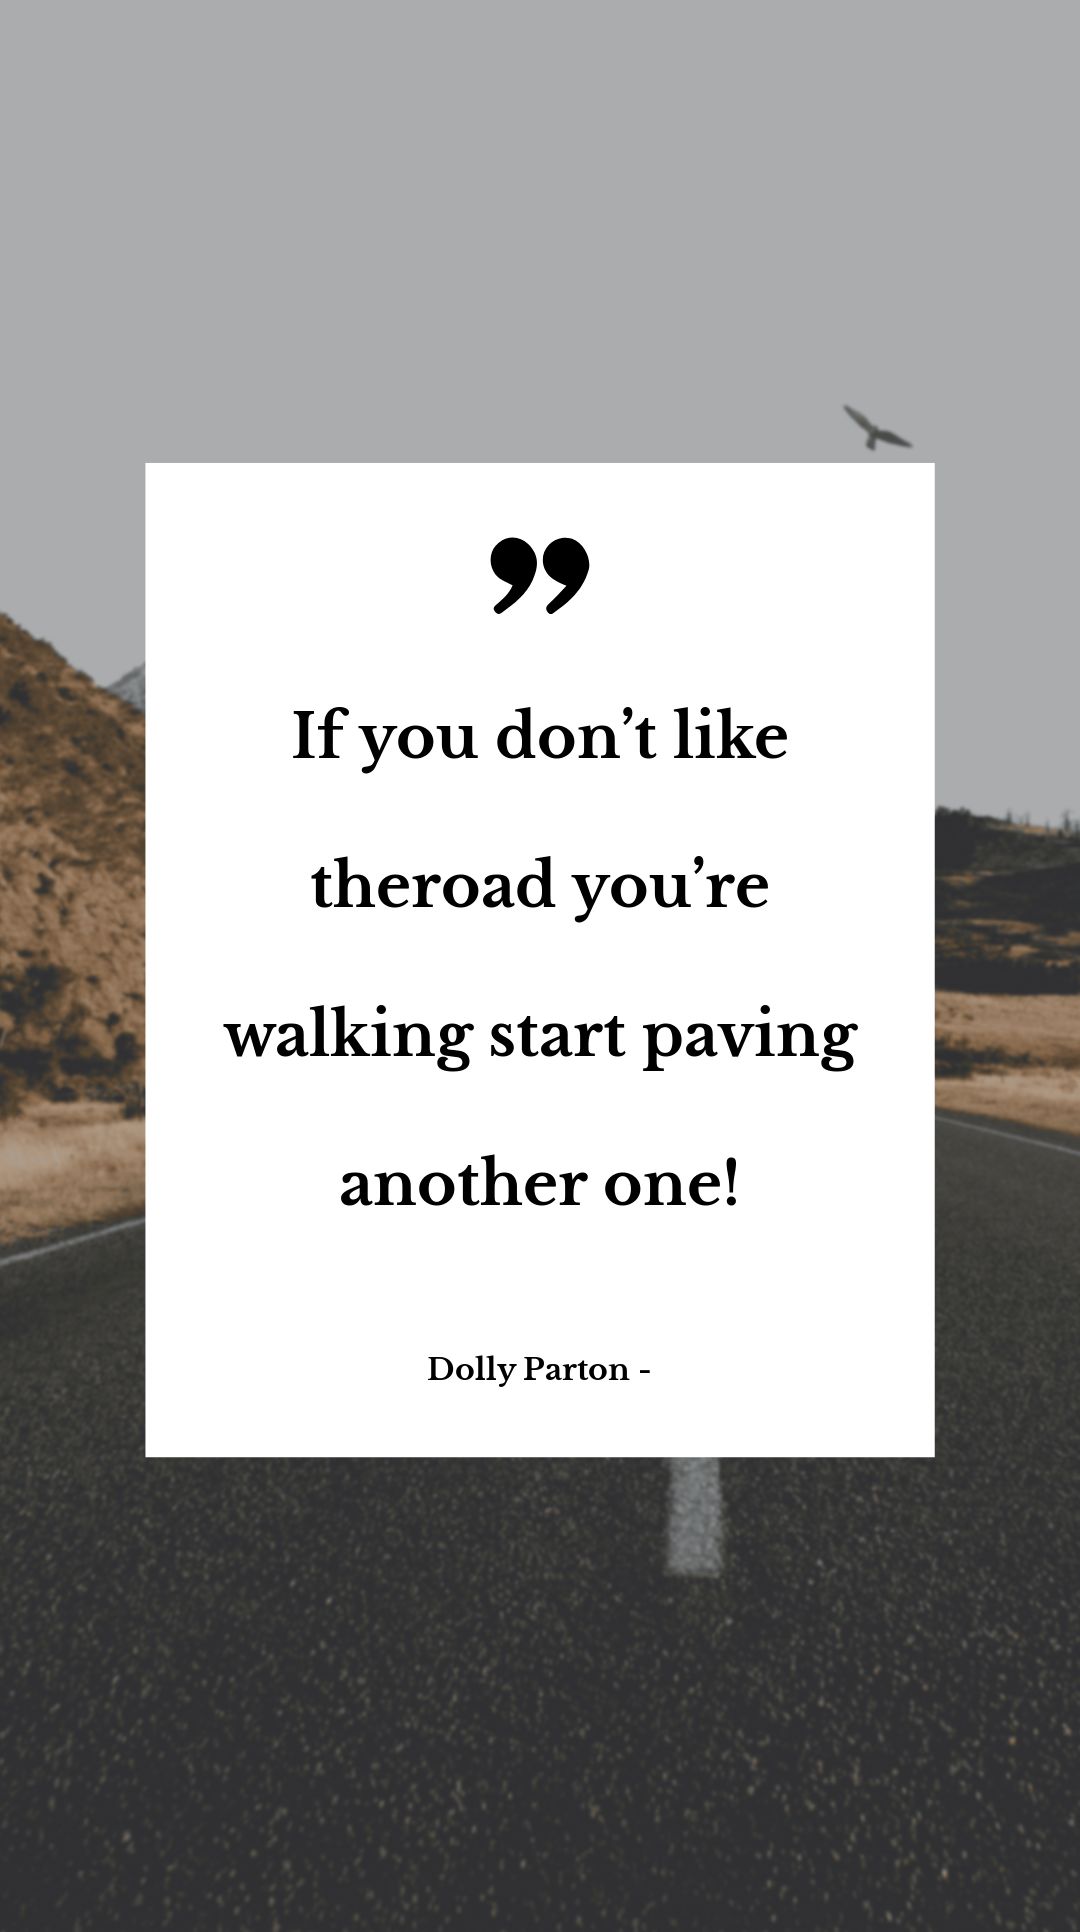 Dolly Parton - If you don’t like the road you’re walking start paving another one!